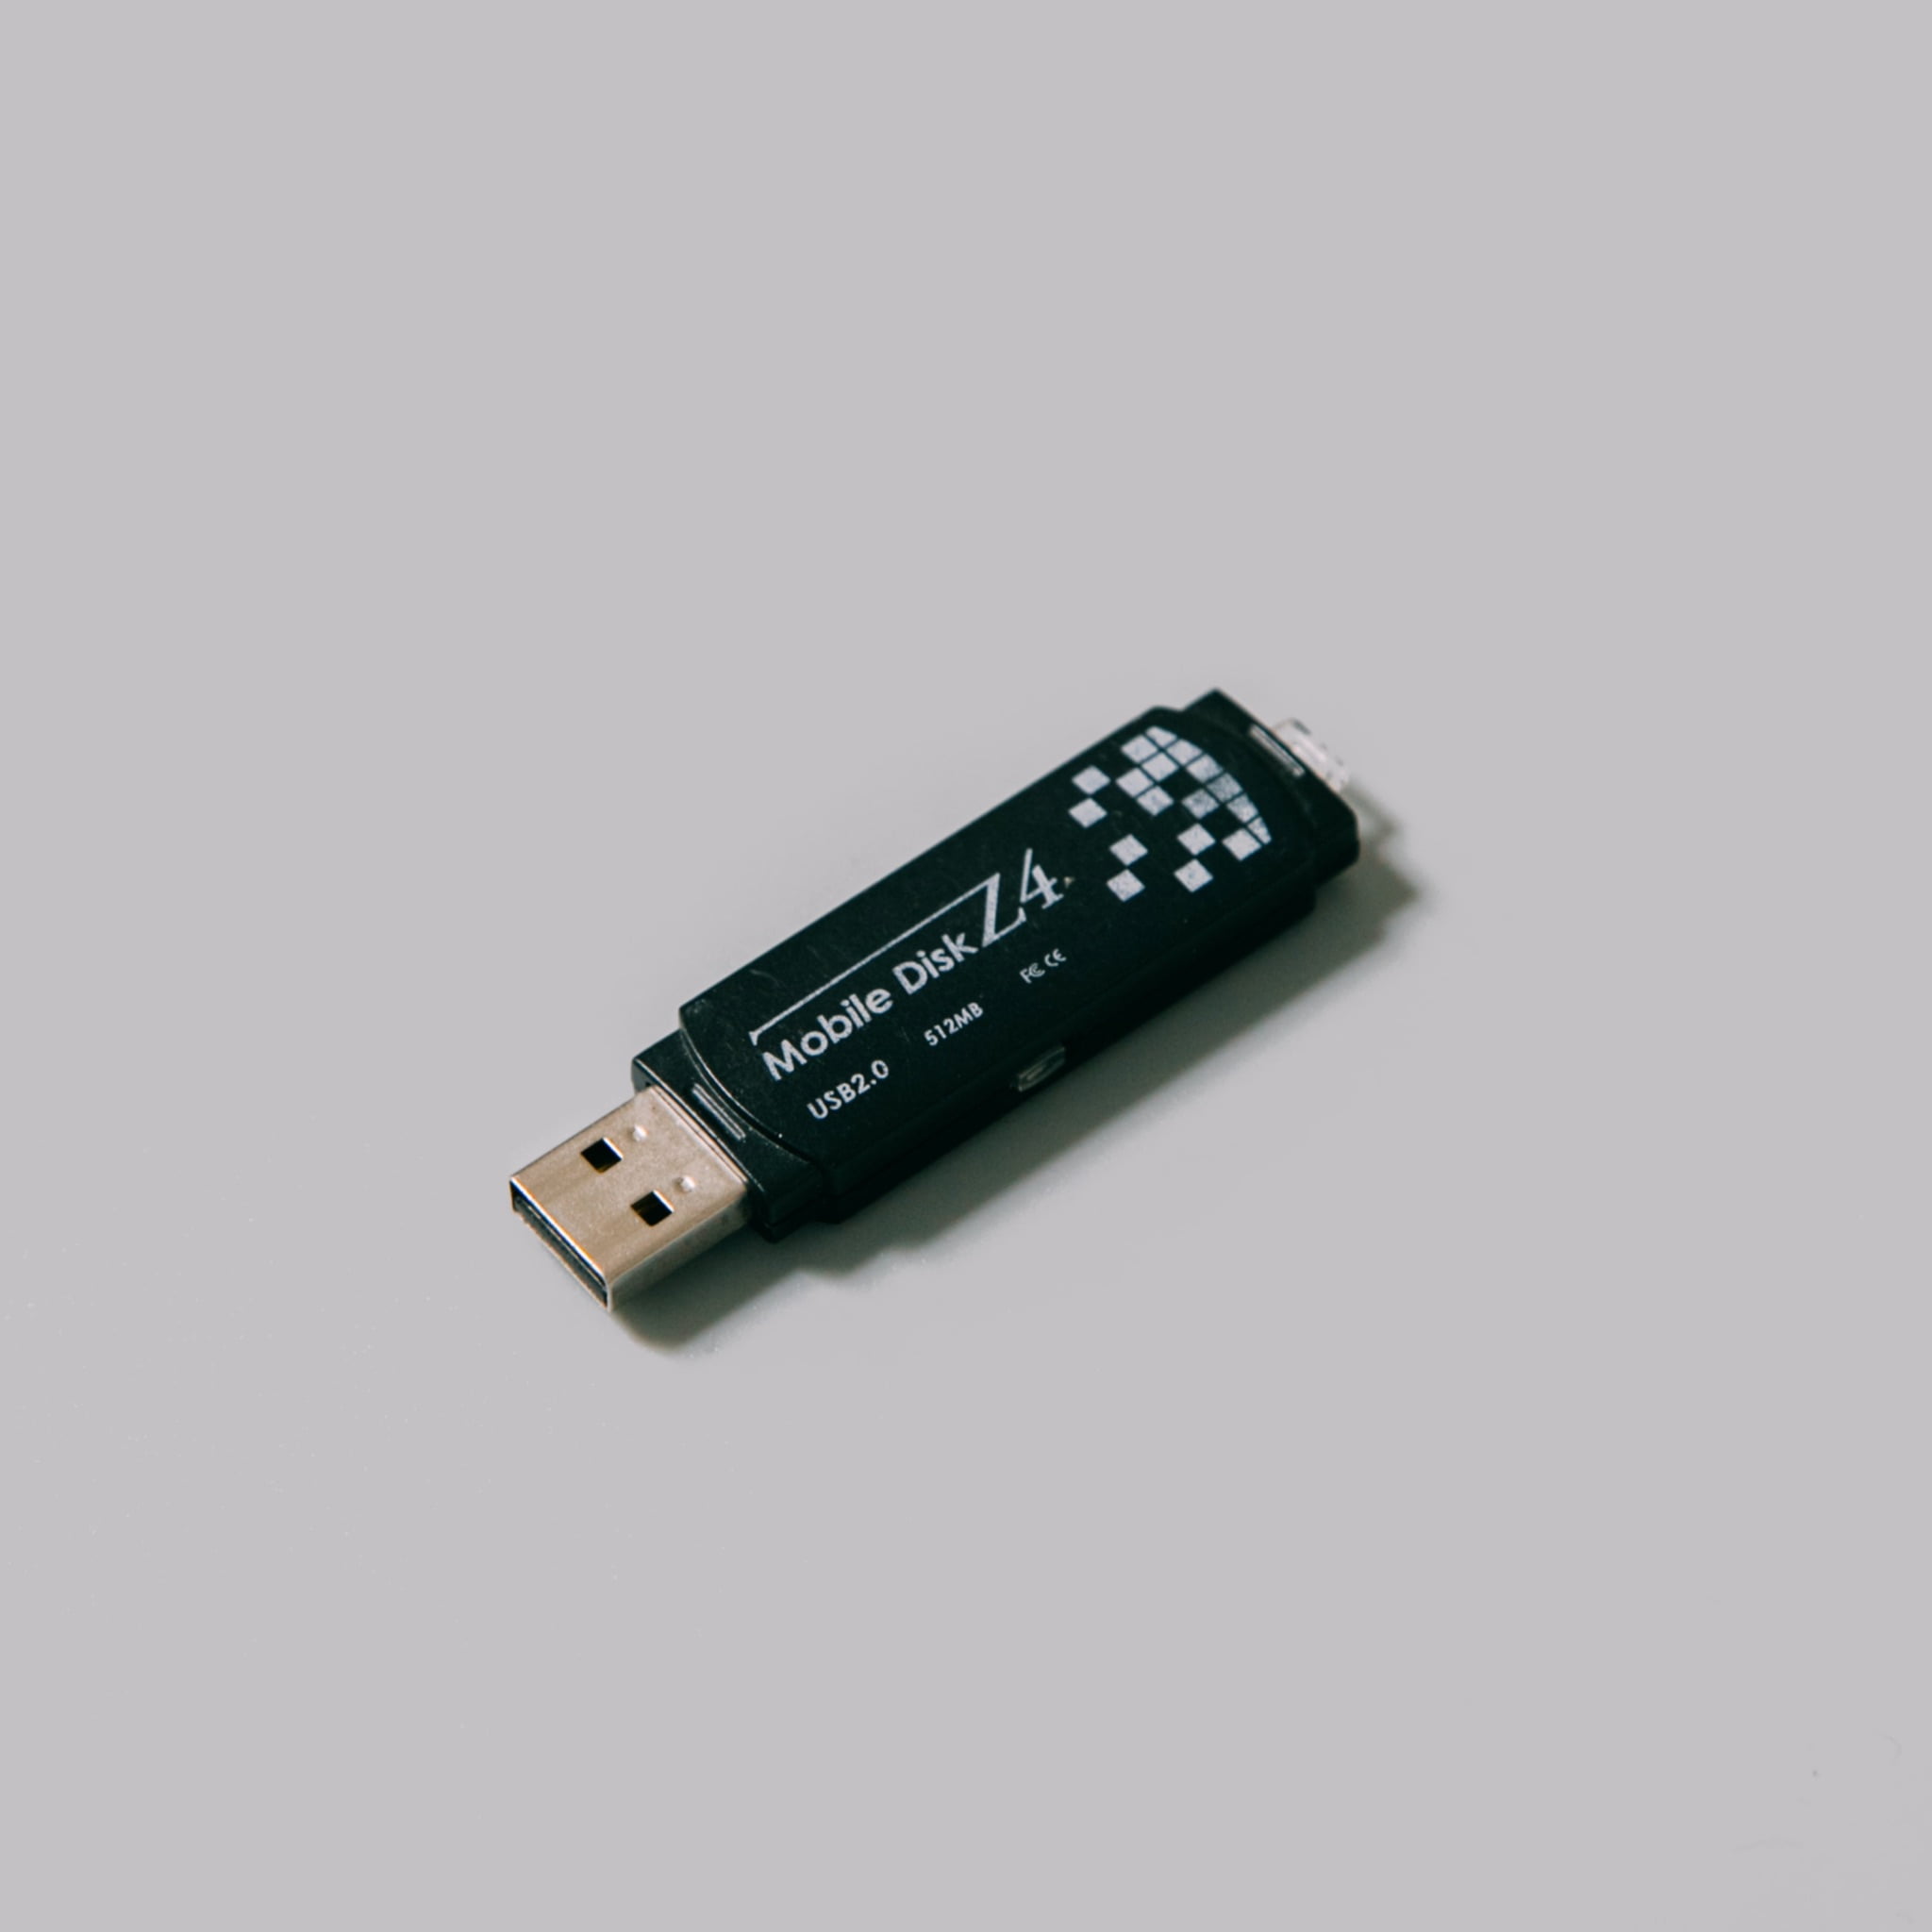 usb flash disk is a must-have tech accessories